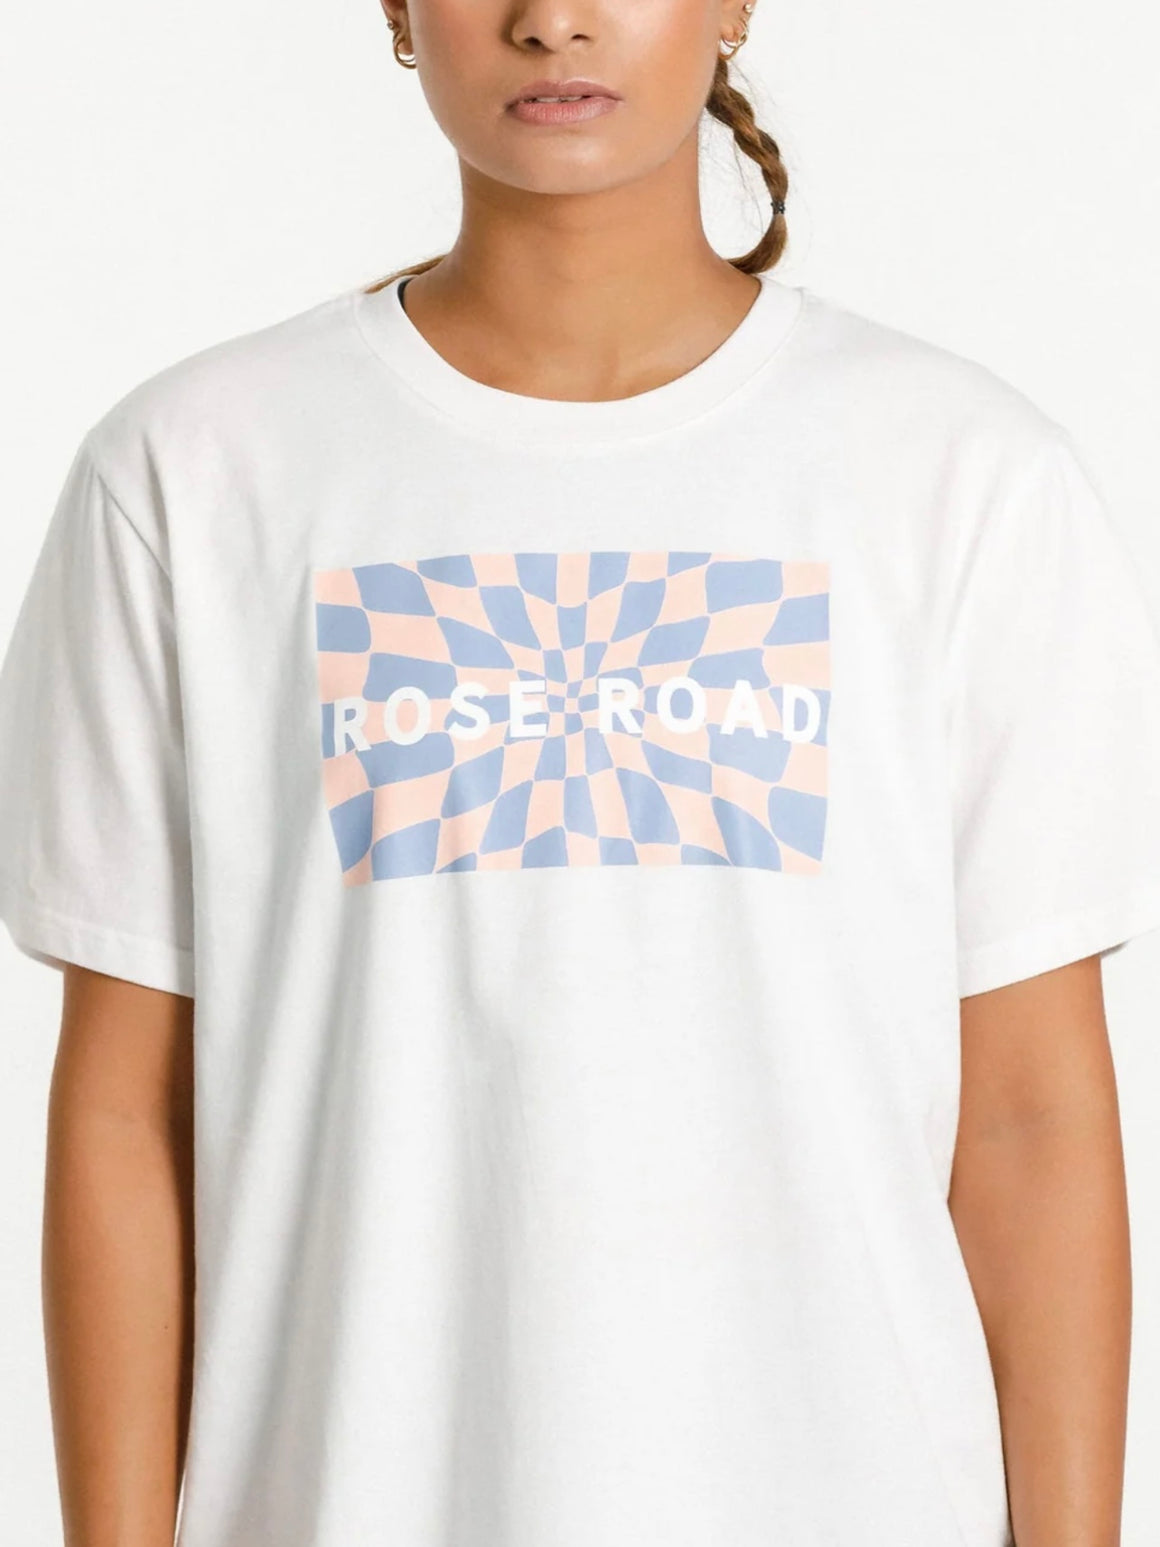 Rose Road Topher Tee-White with Mirror Print | NZ womens clothing | Trio Boutique Geraldine